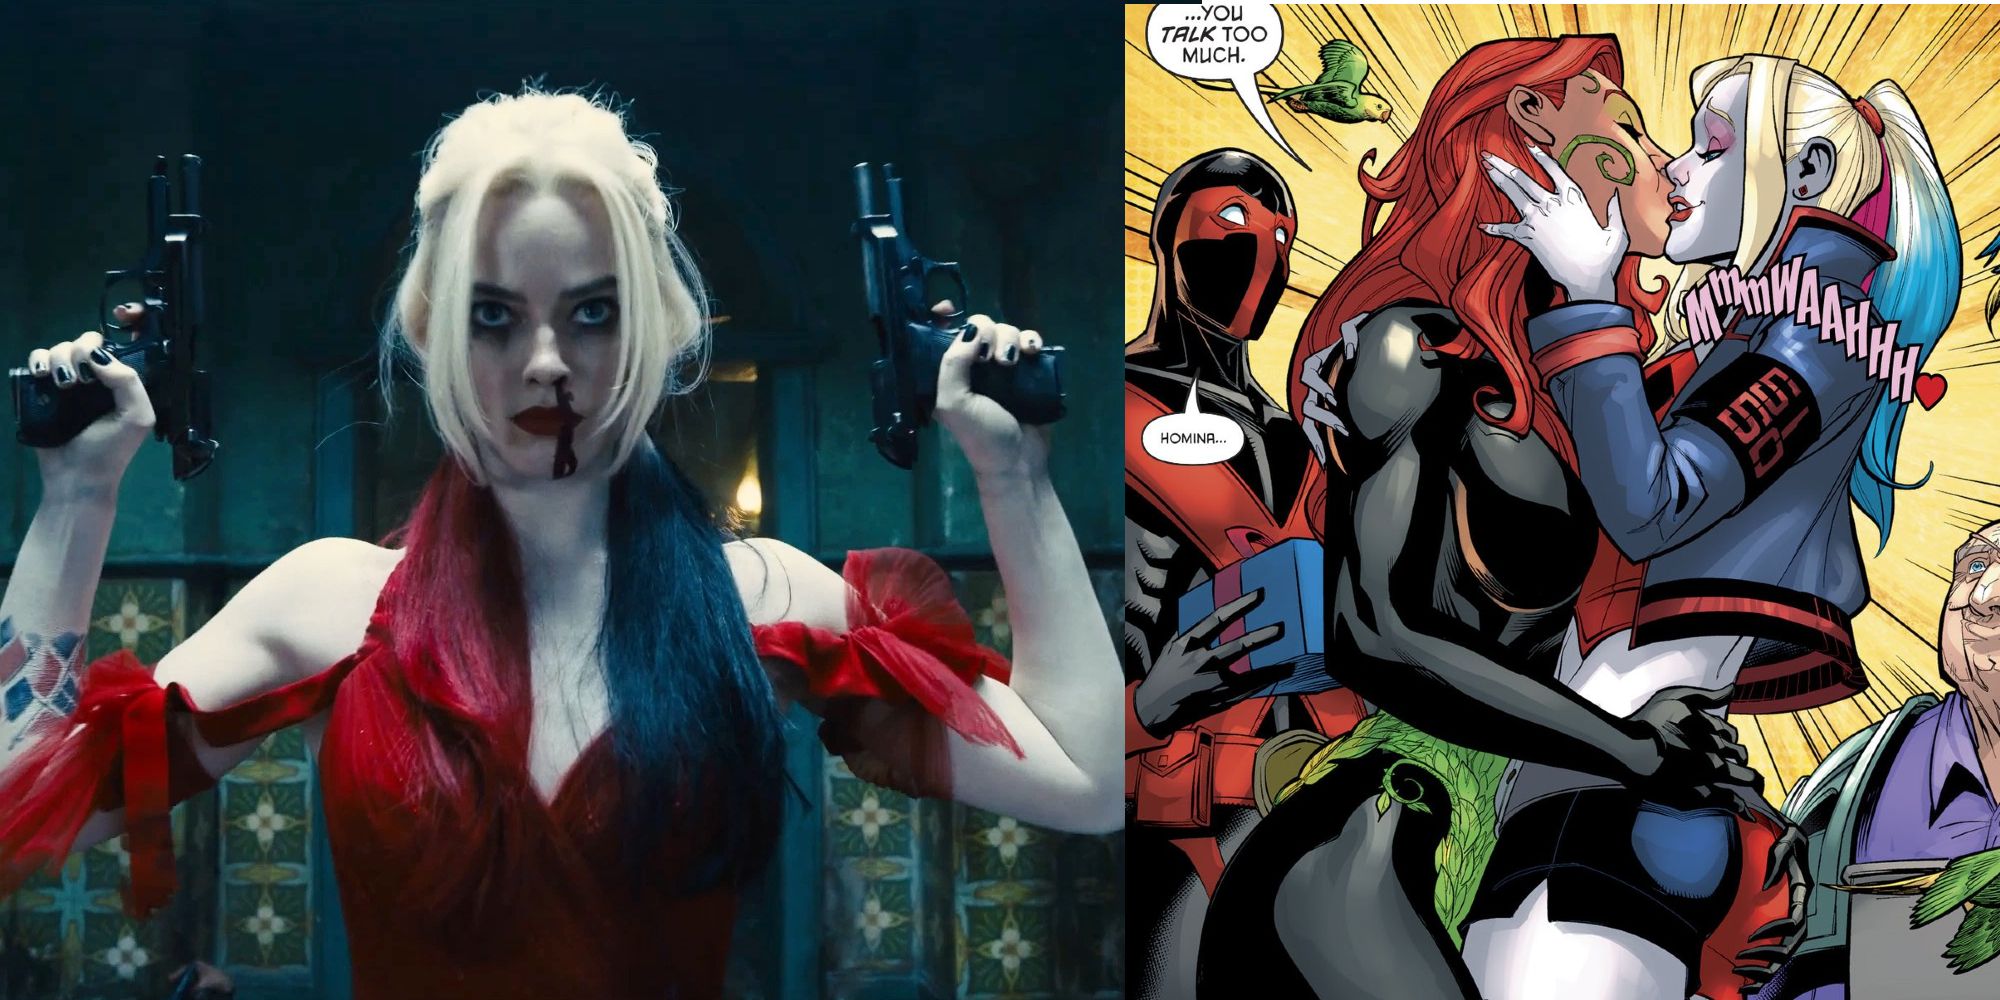 Margot Robbie as Harley Quinn in The Suicide Squad and kissing Poison Ivy in comic